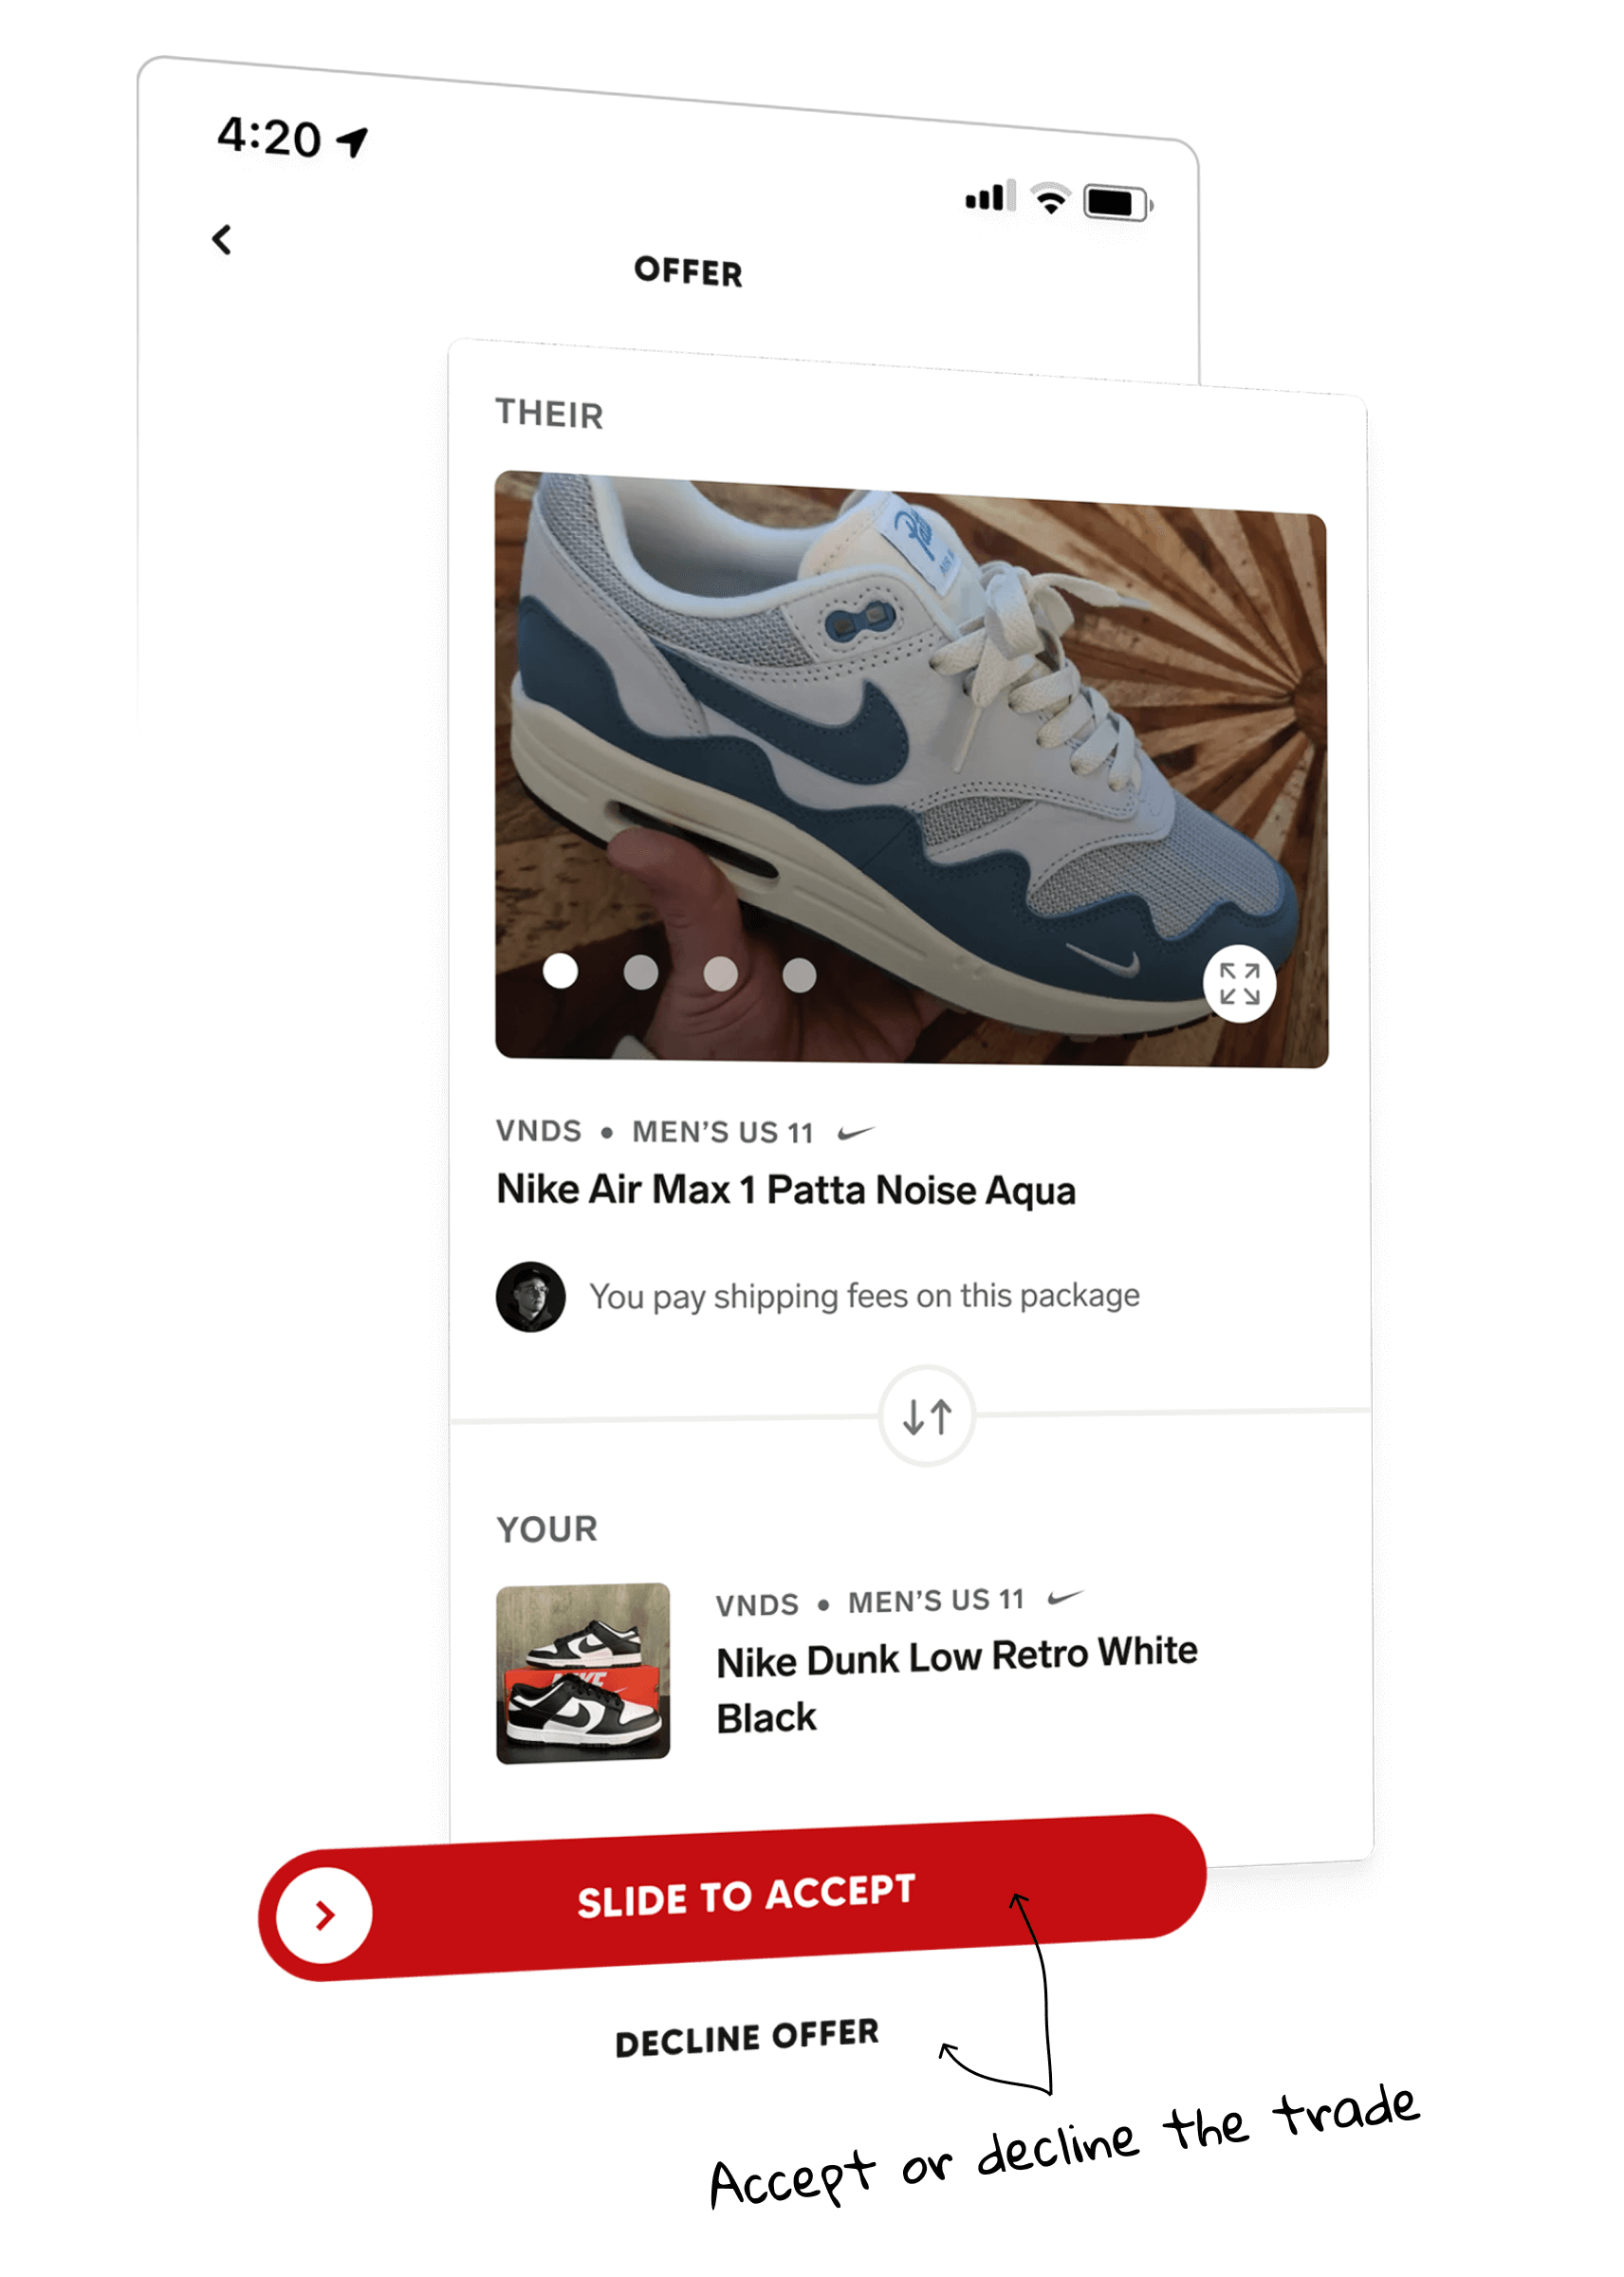 COLLECT App UI - Accepting a Trade